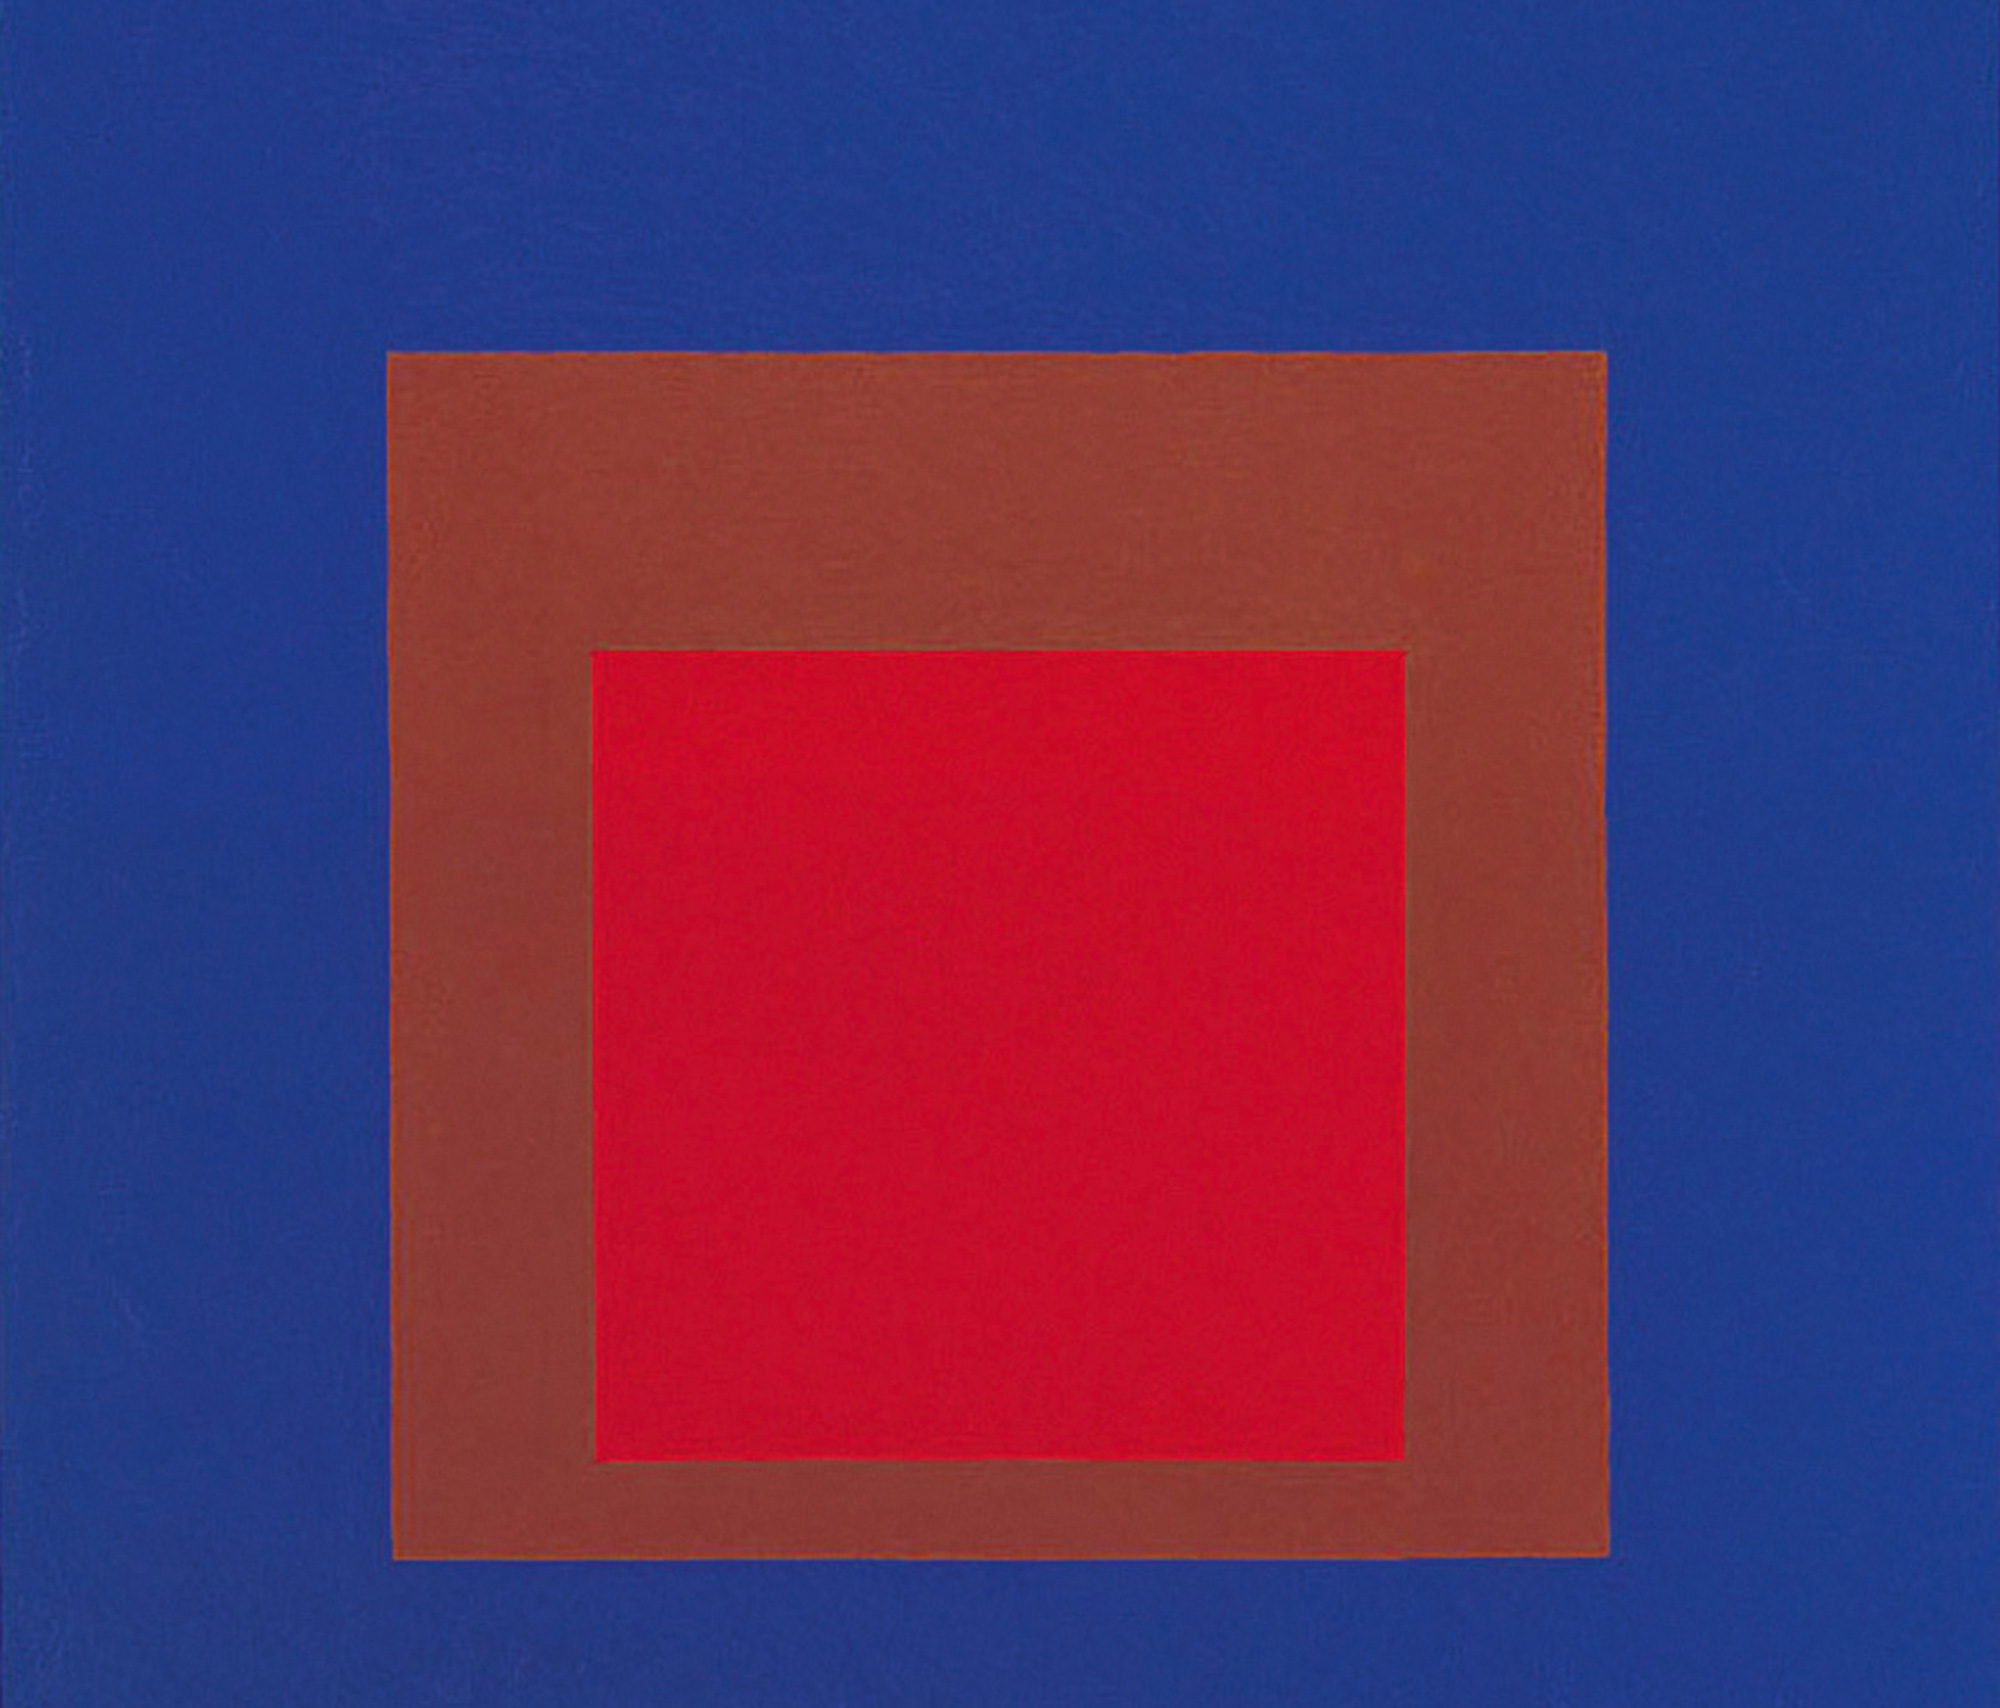 A detail of a red square from Josef Albers’s nineteen sixty-four painting titled “Homage to the Square: On an Early Sky.”